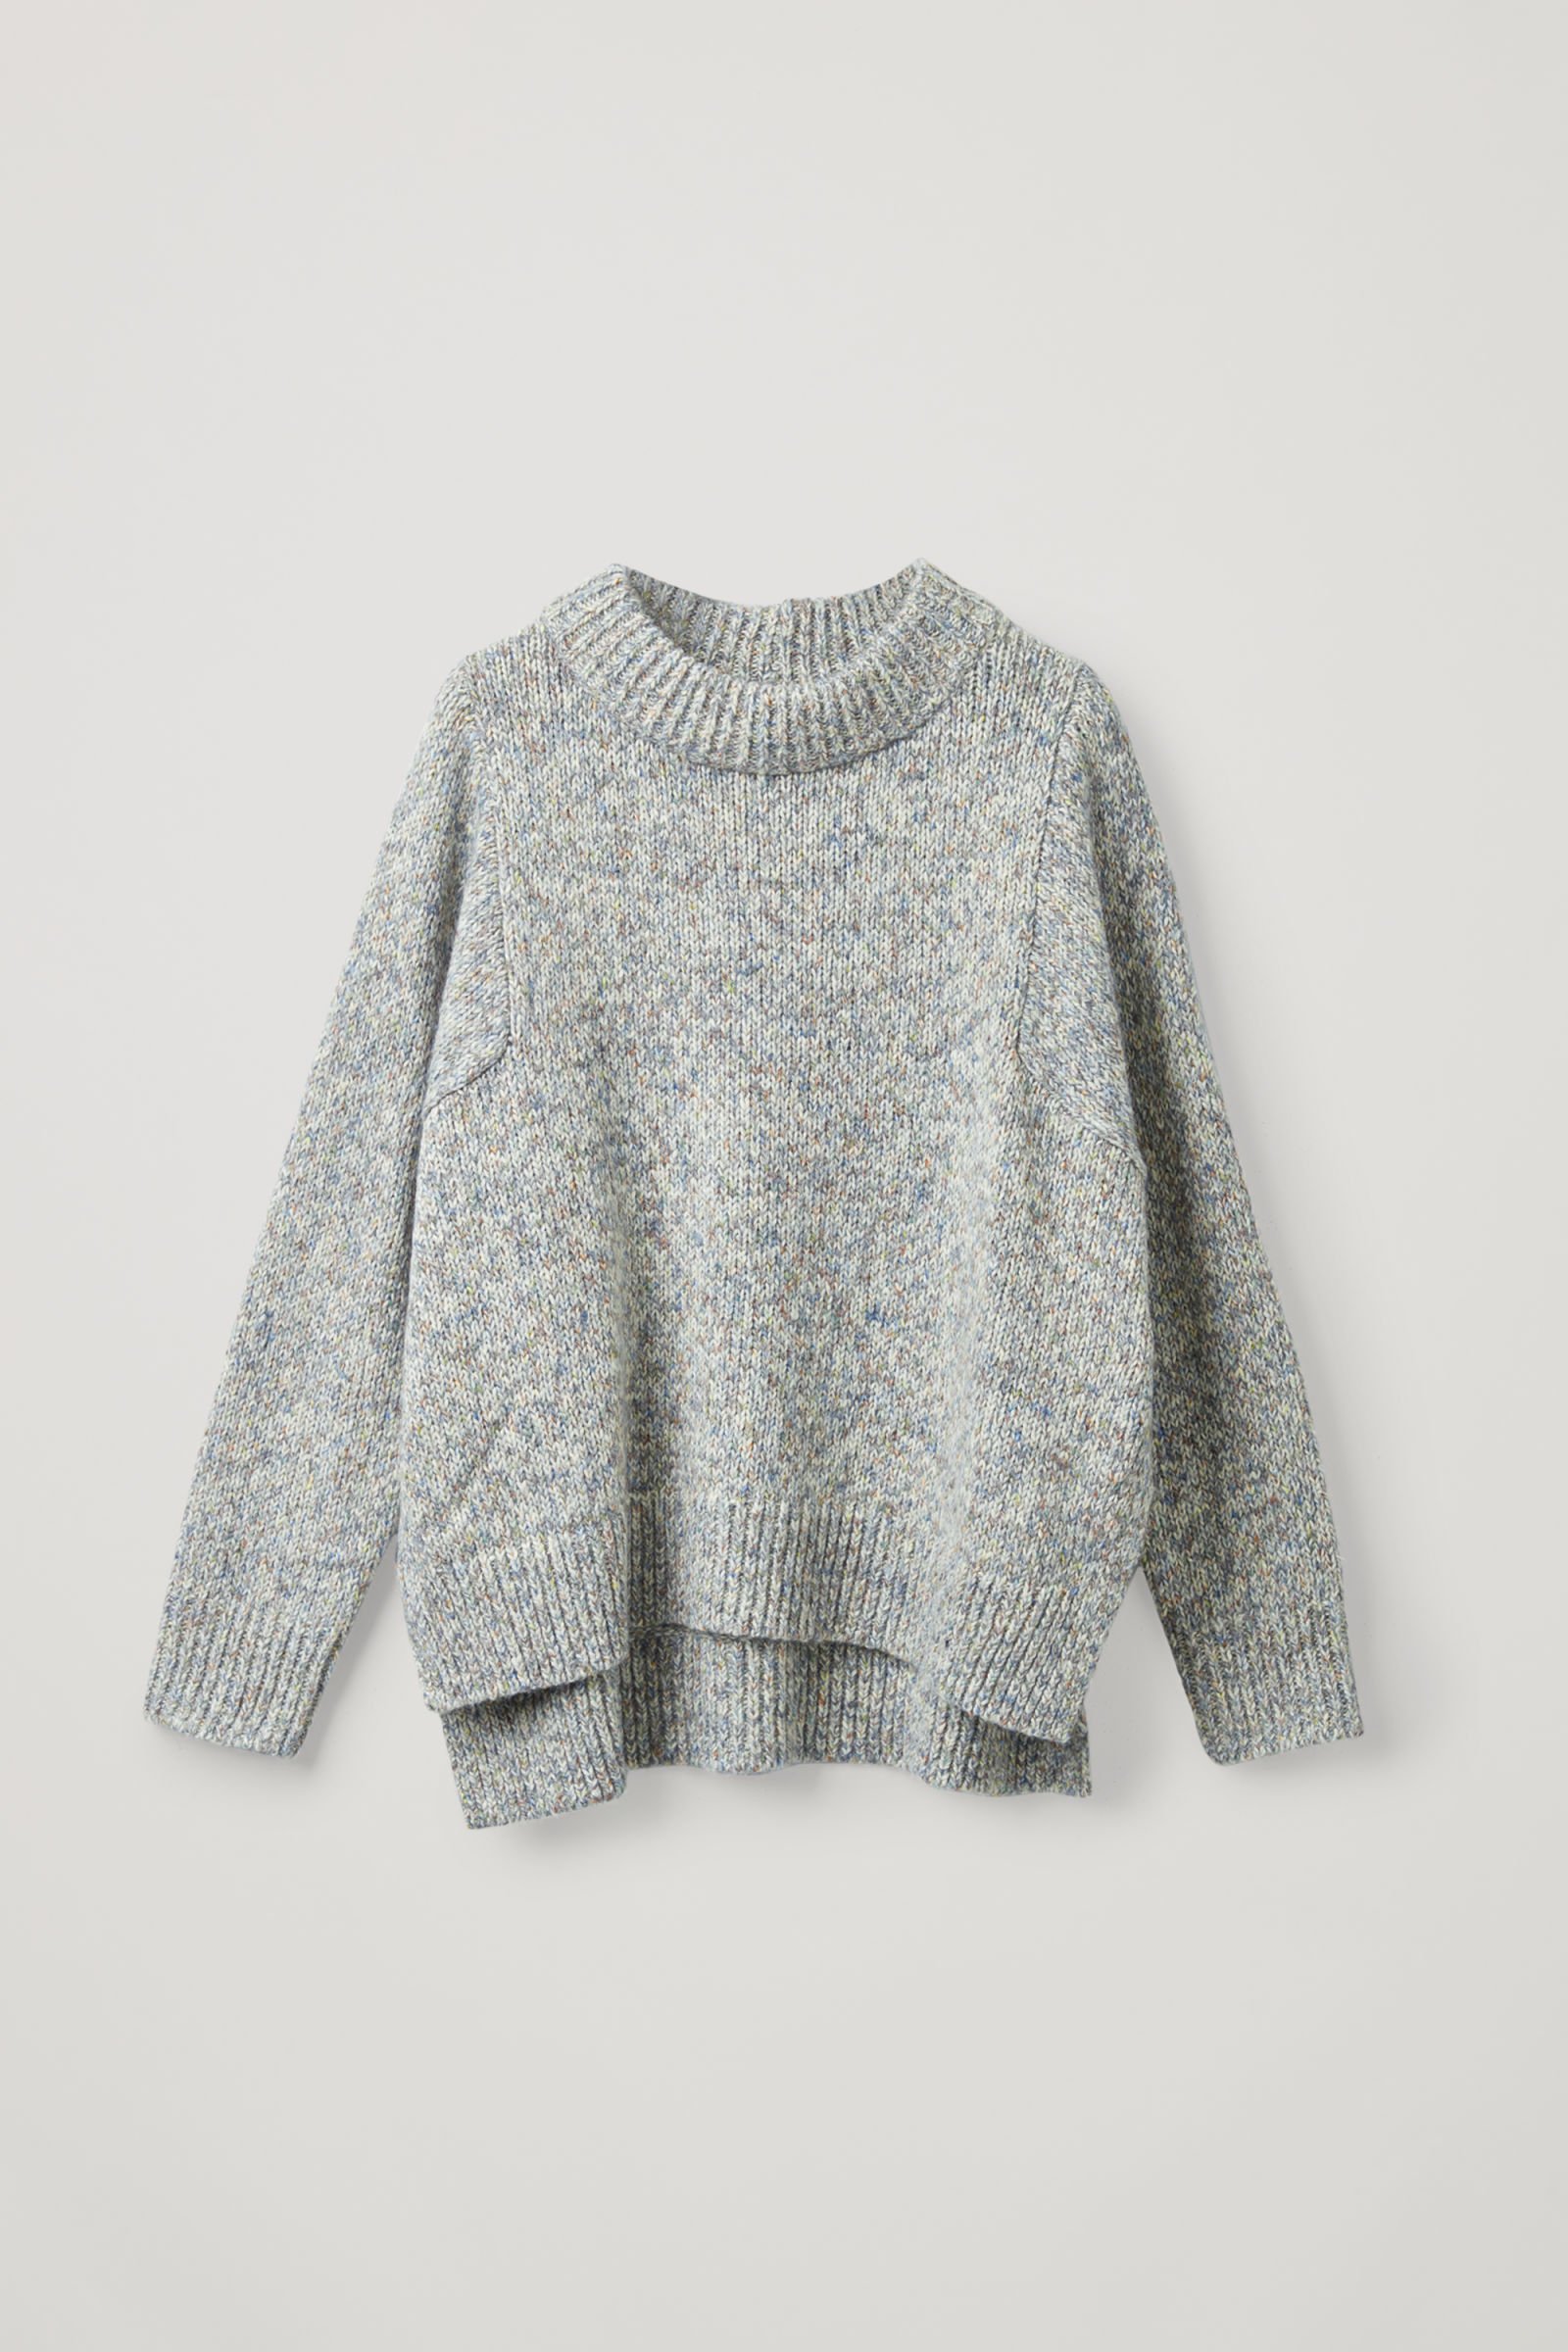 COS Speckled Chunky-Knit Jumper | Endource